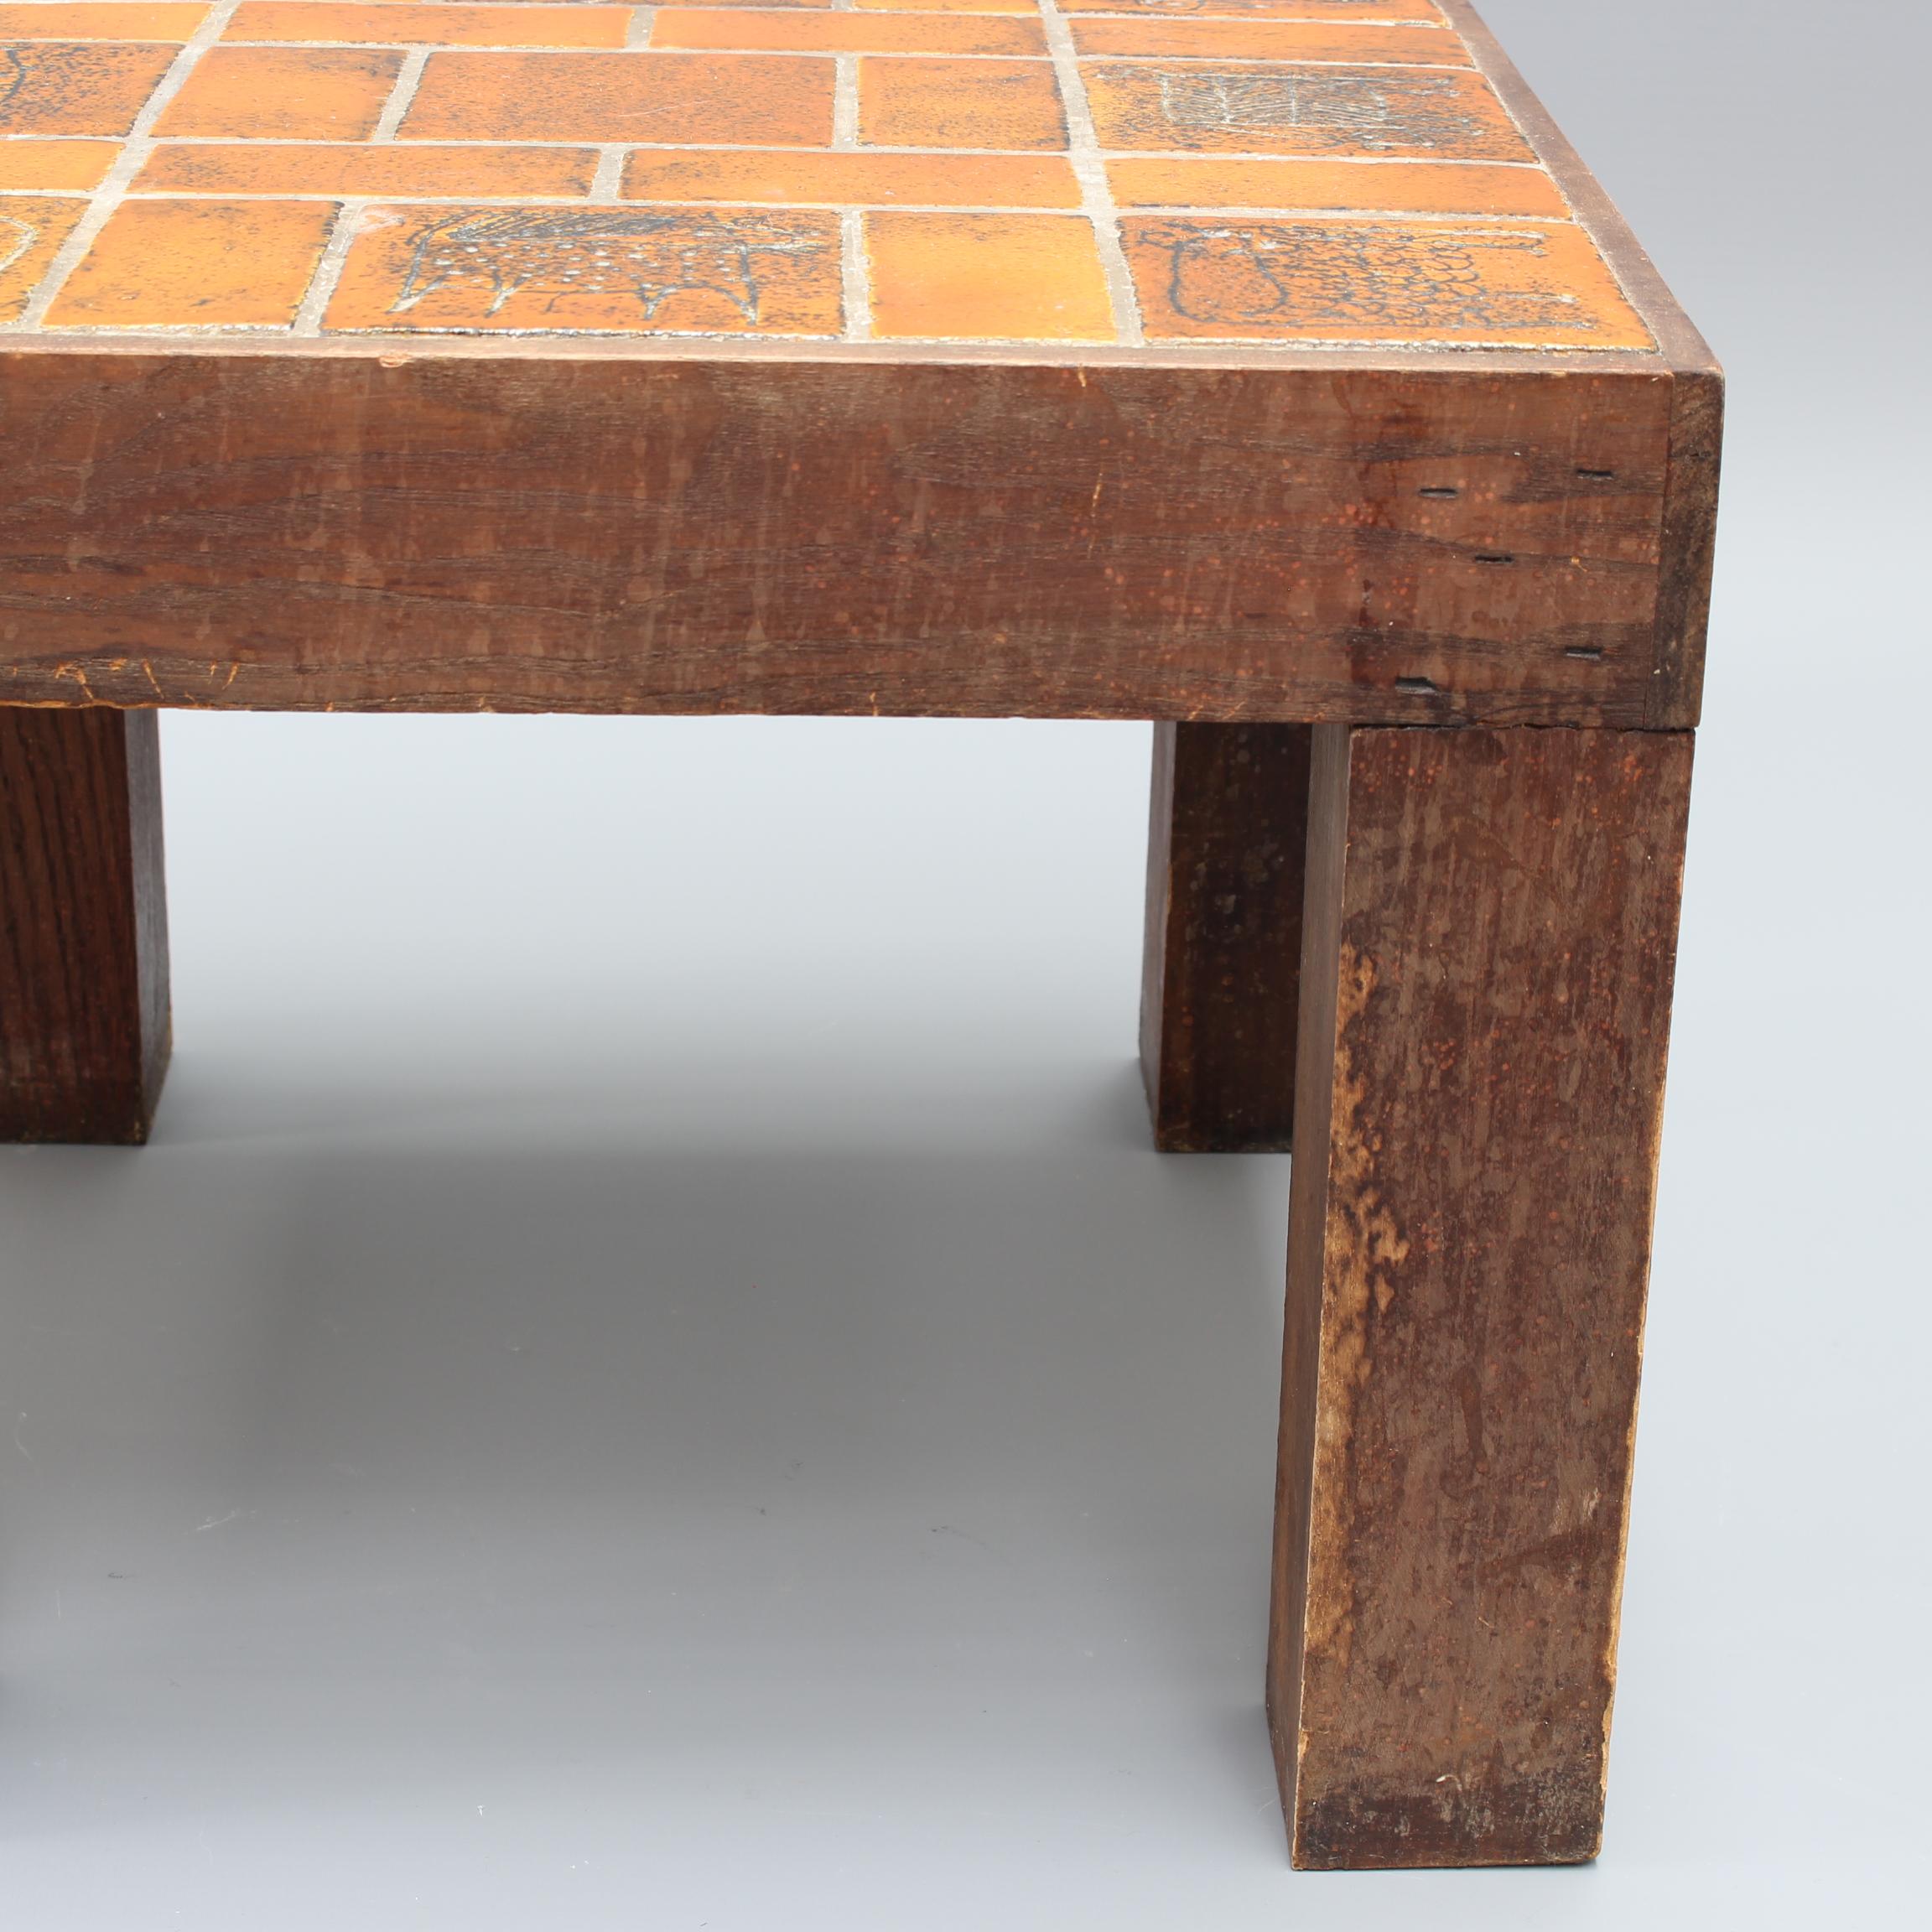 Vintage French Square Side Table with Ceramic Tile Top by Jacques Blin, c. 1950s For Sale 5